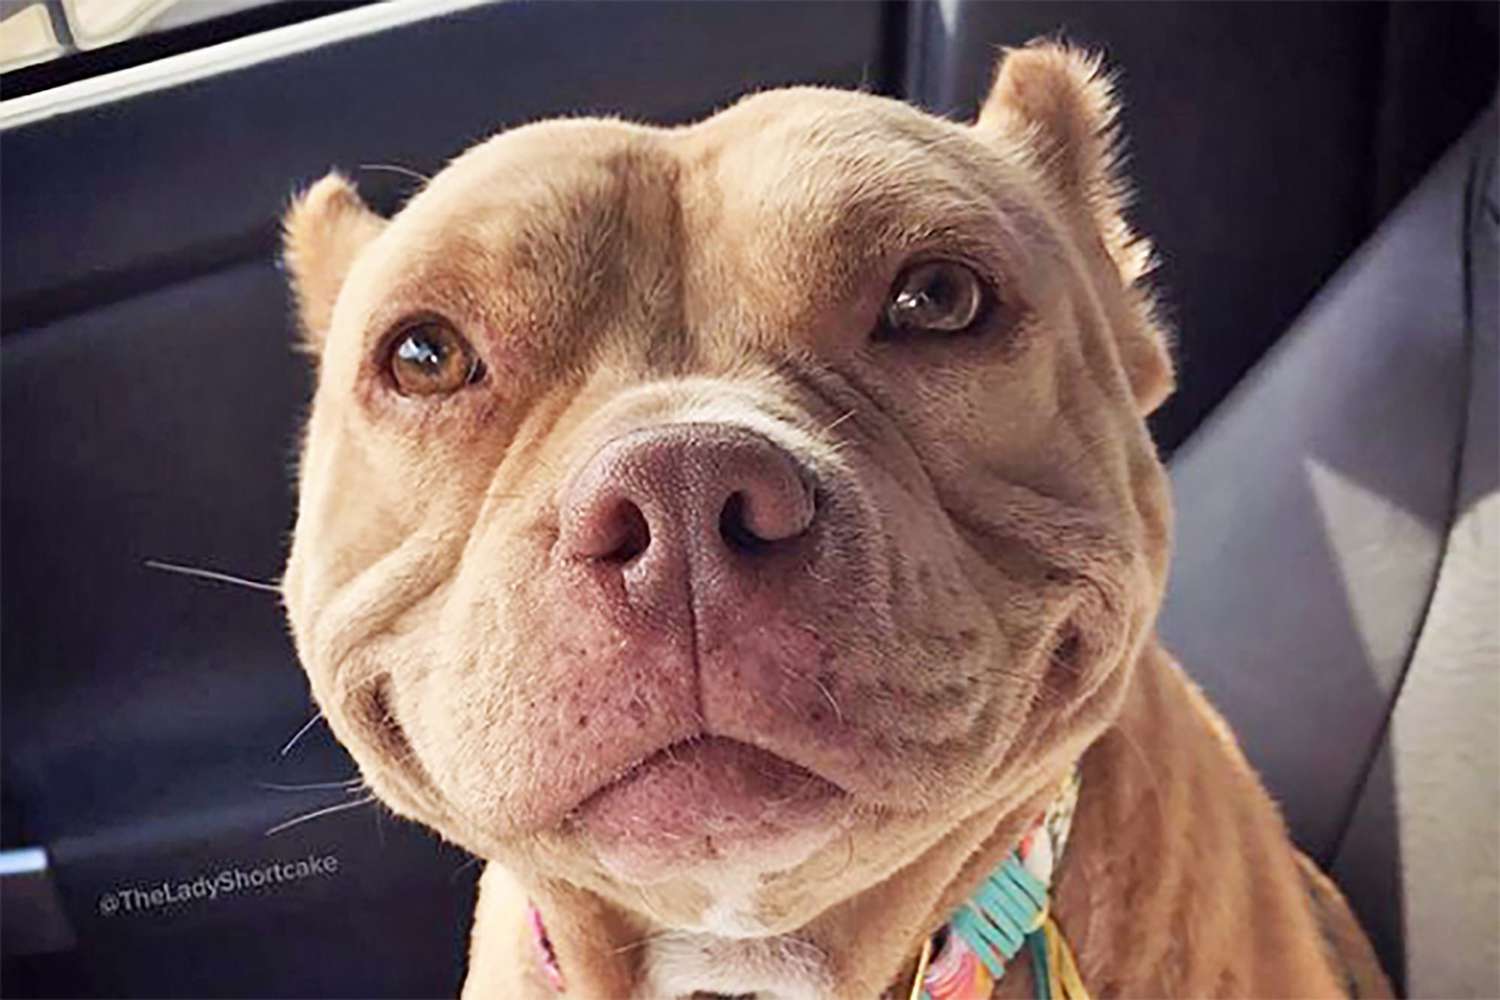 Grinning Pit Bull Named 'Lady Shortcake Gains Following After Adoption |  Daily Paws